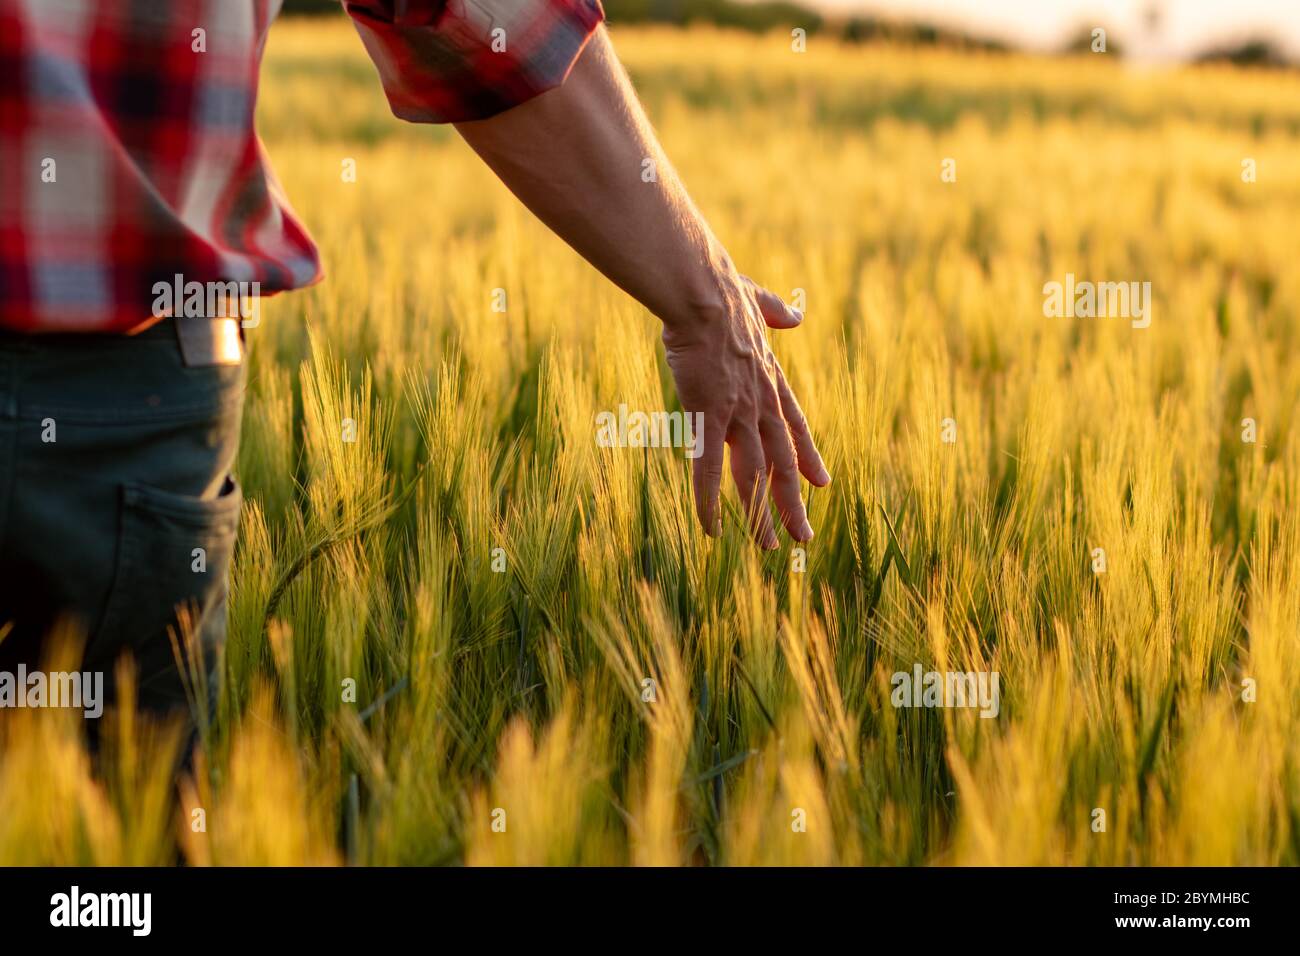 Farmer or agronomist walking through field checking golden wheat crop in sunset. Hand touching ripening wheat grains in early summer. Stock Photo